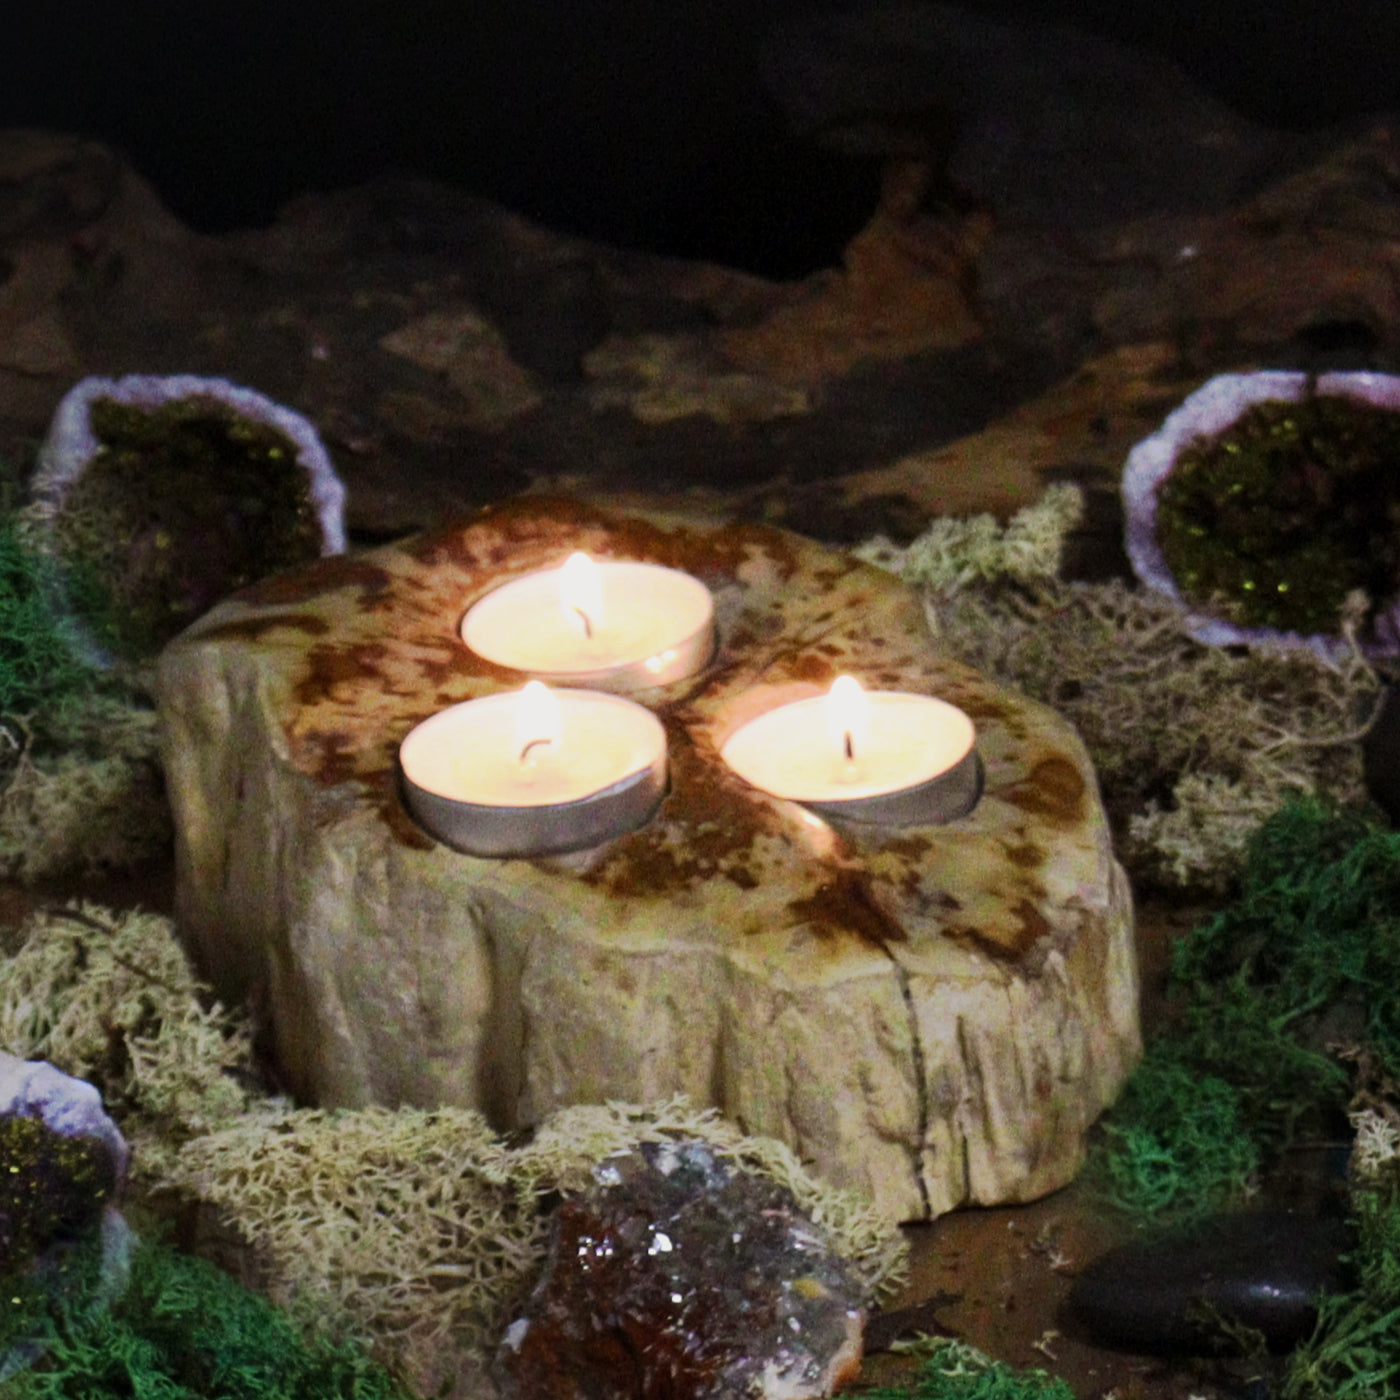 Natural Ecological Double Petrified Wood Tealight Holder.